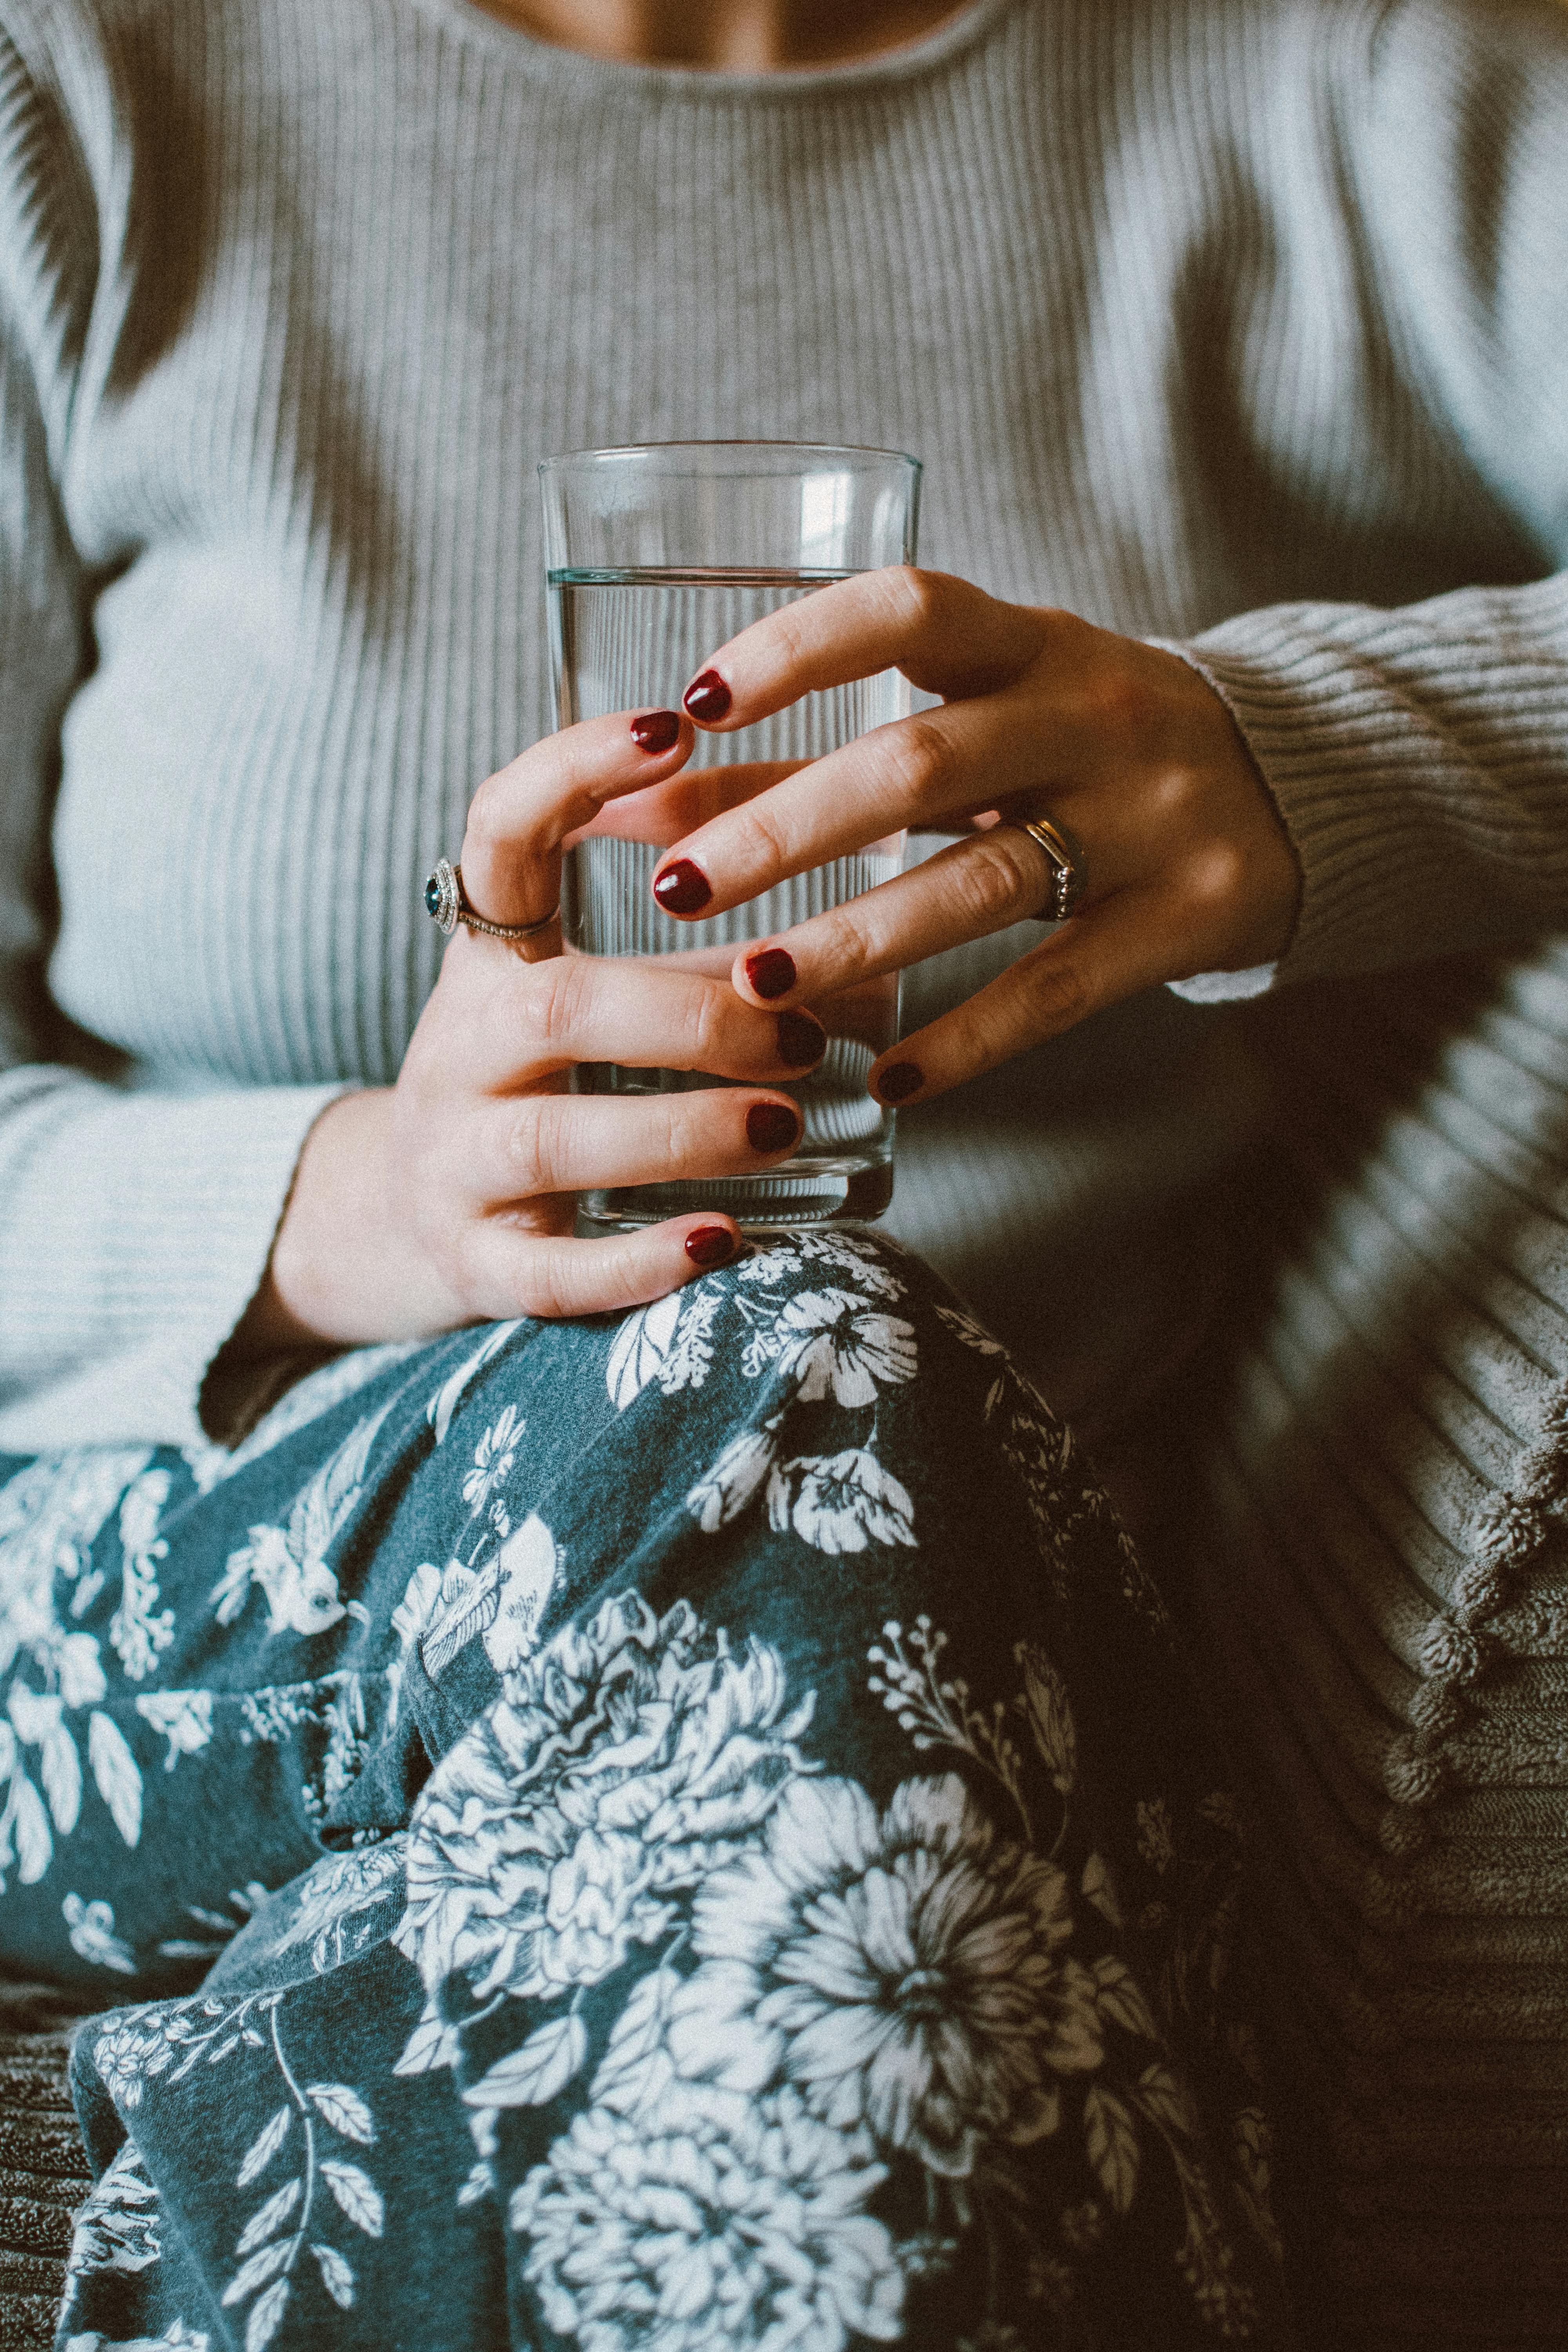 Woman holding a glass of water | Source: Pexels